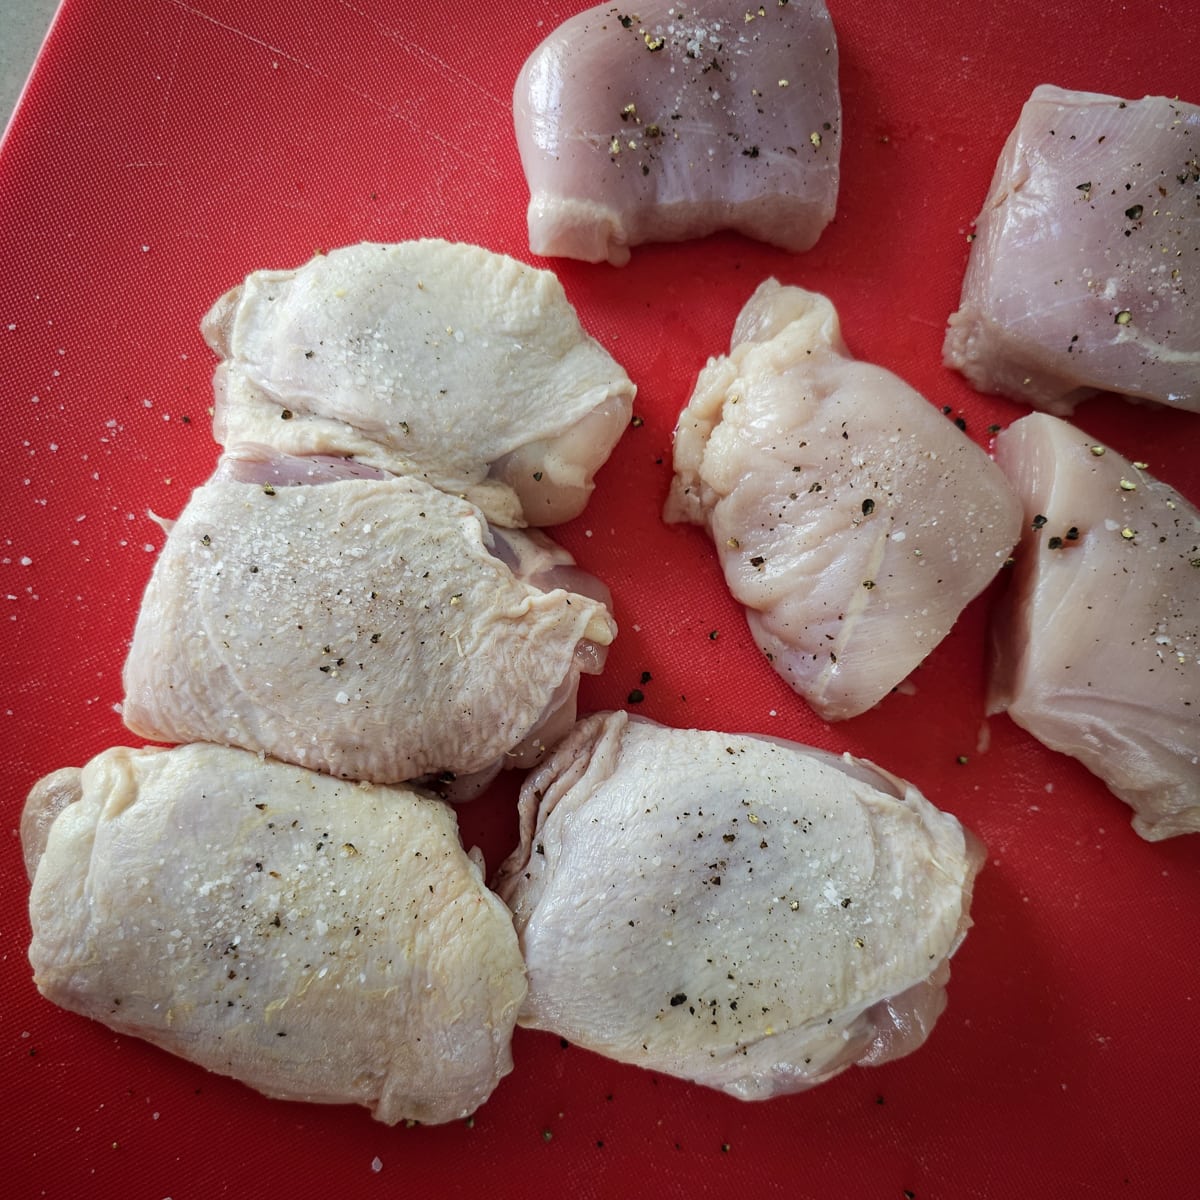 Chicken thighs seasoned with salt and pepper.